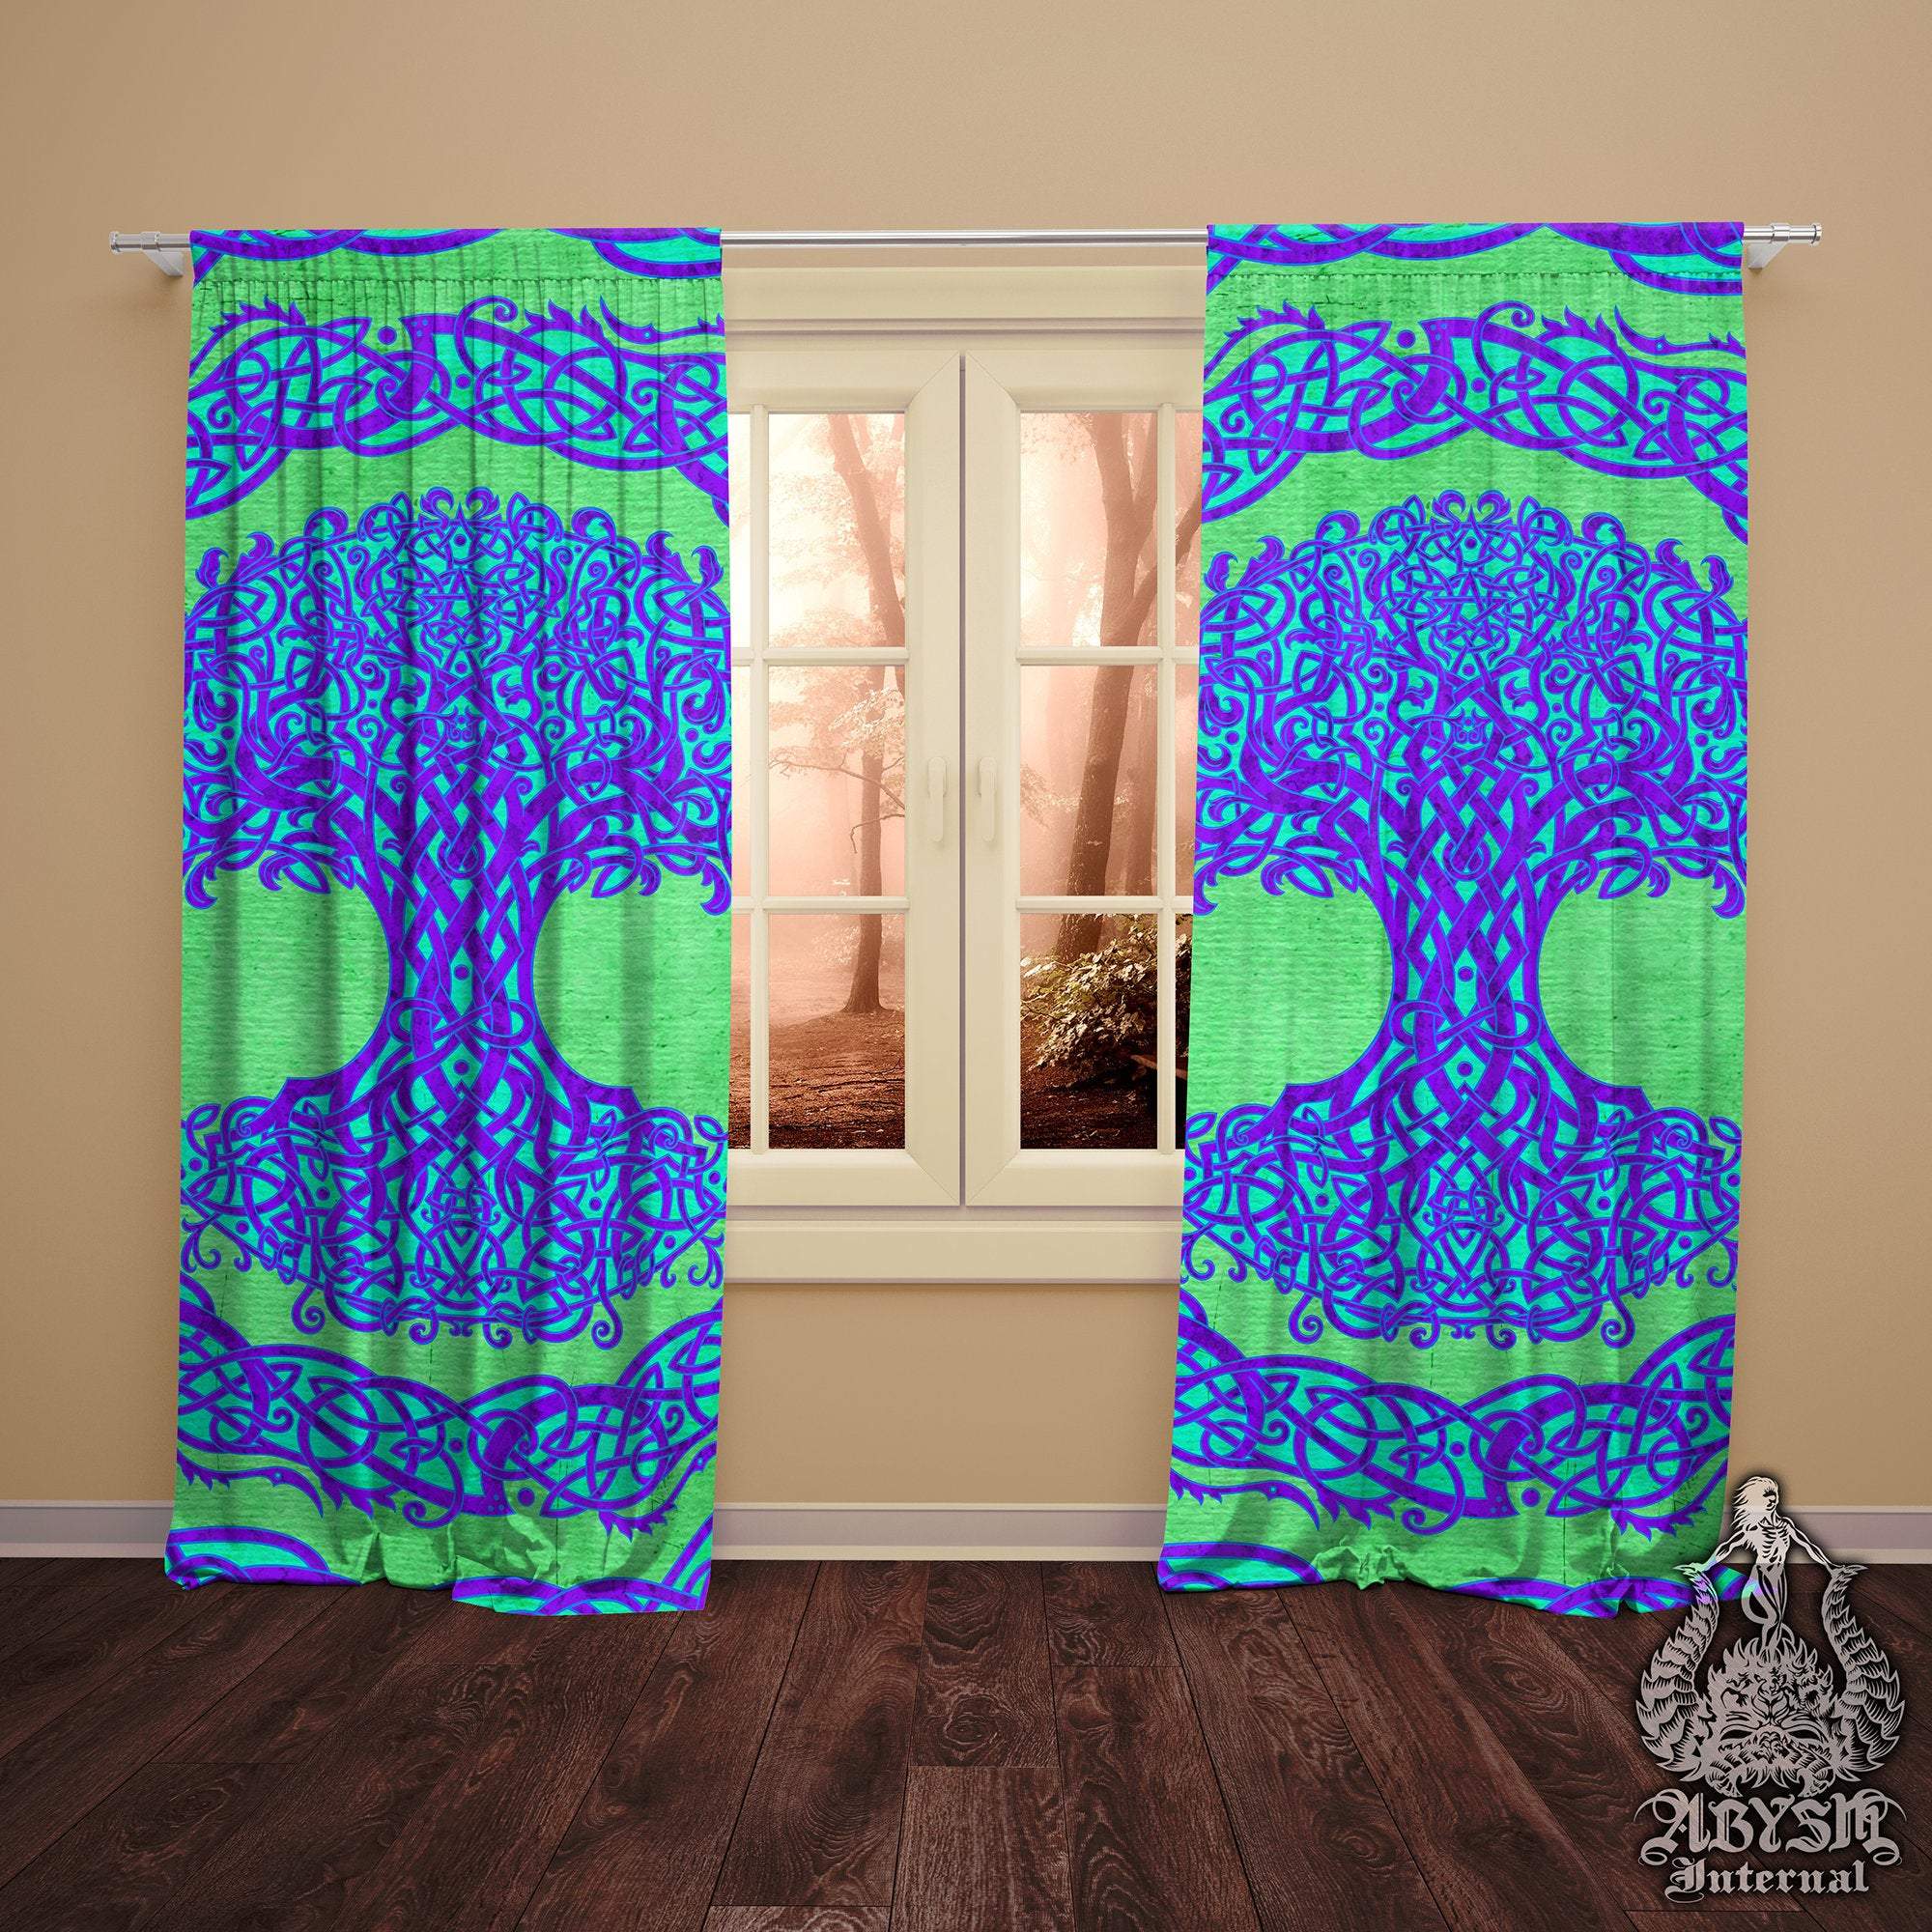 Tree of Life Blackout Curtains, Long Window Panels, Celtic Knot, Wiccan Room Decor, Art Print, Funky and Eclectic Home Decor - Psy, Green & Purple - Abysm Internal